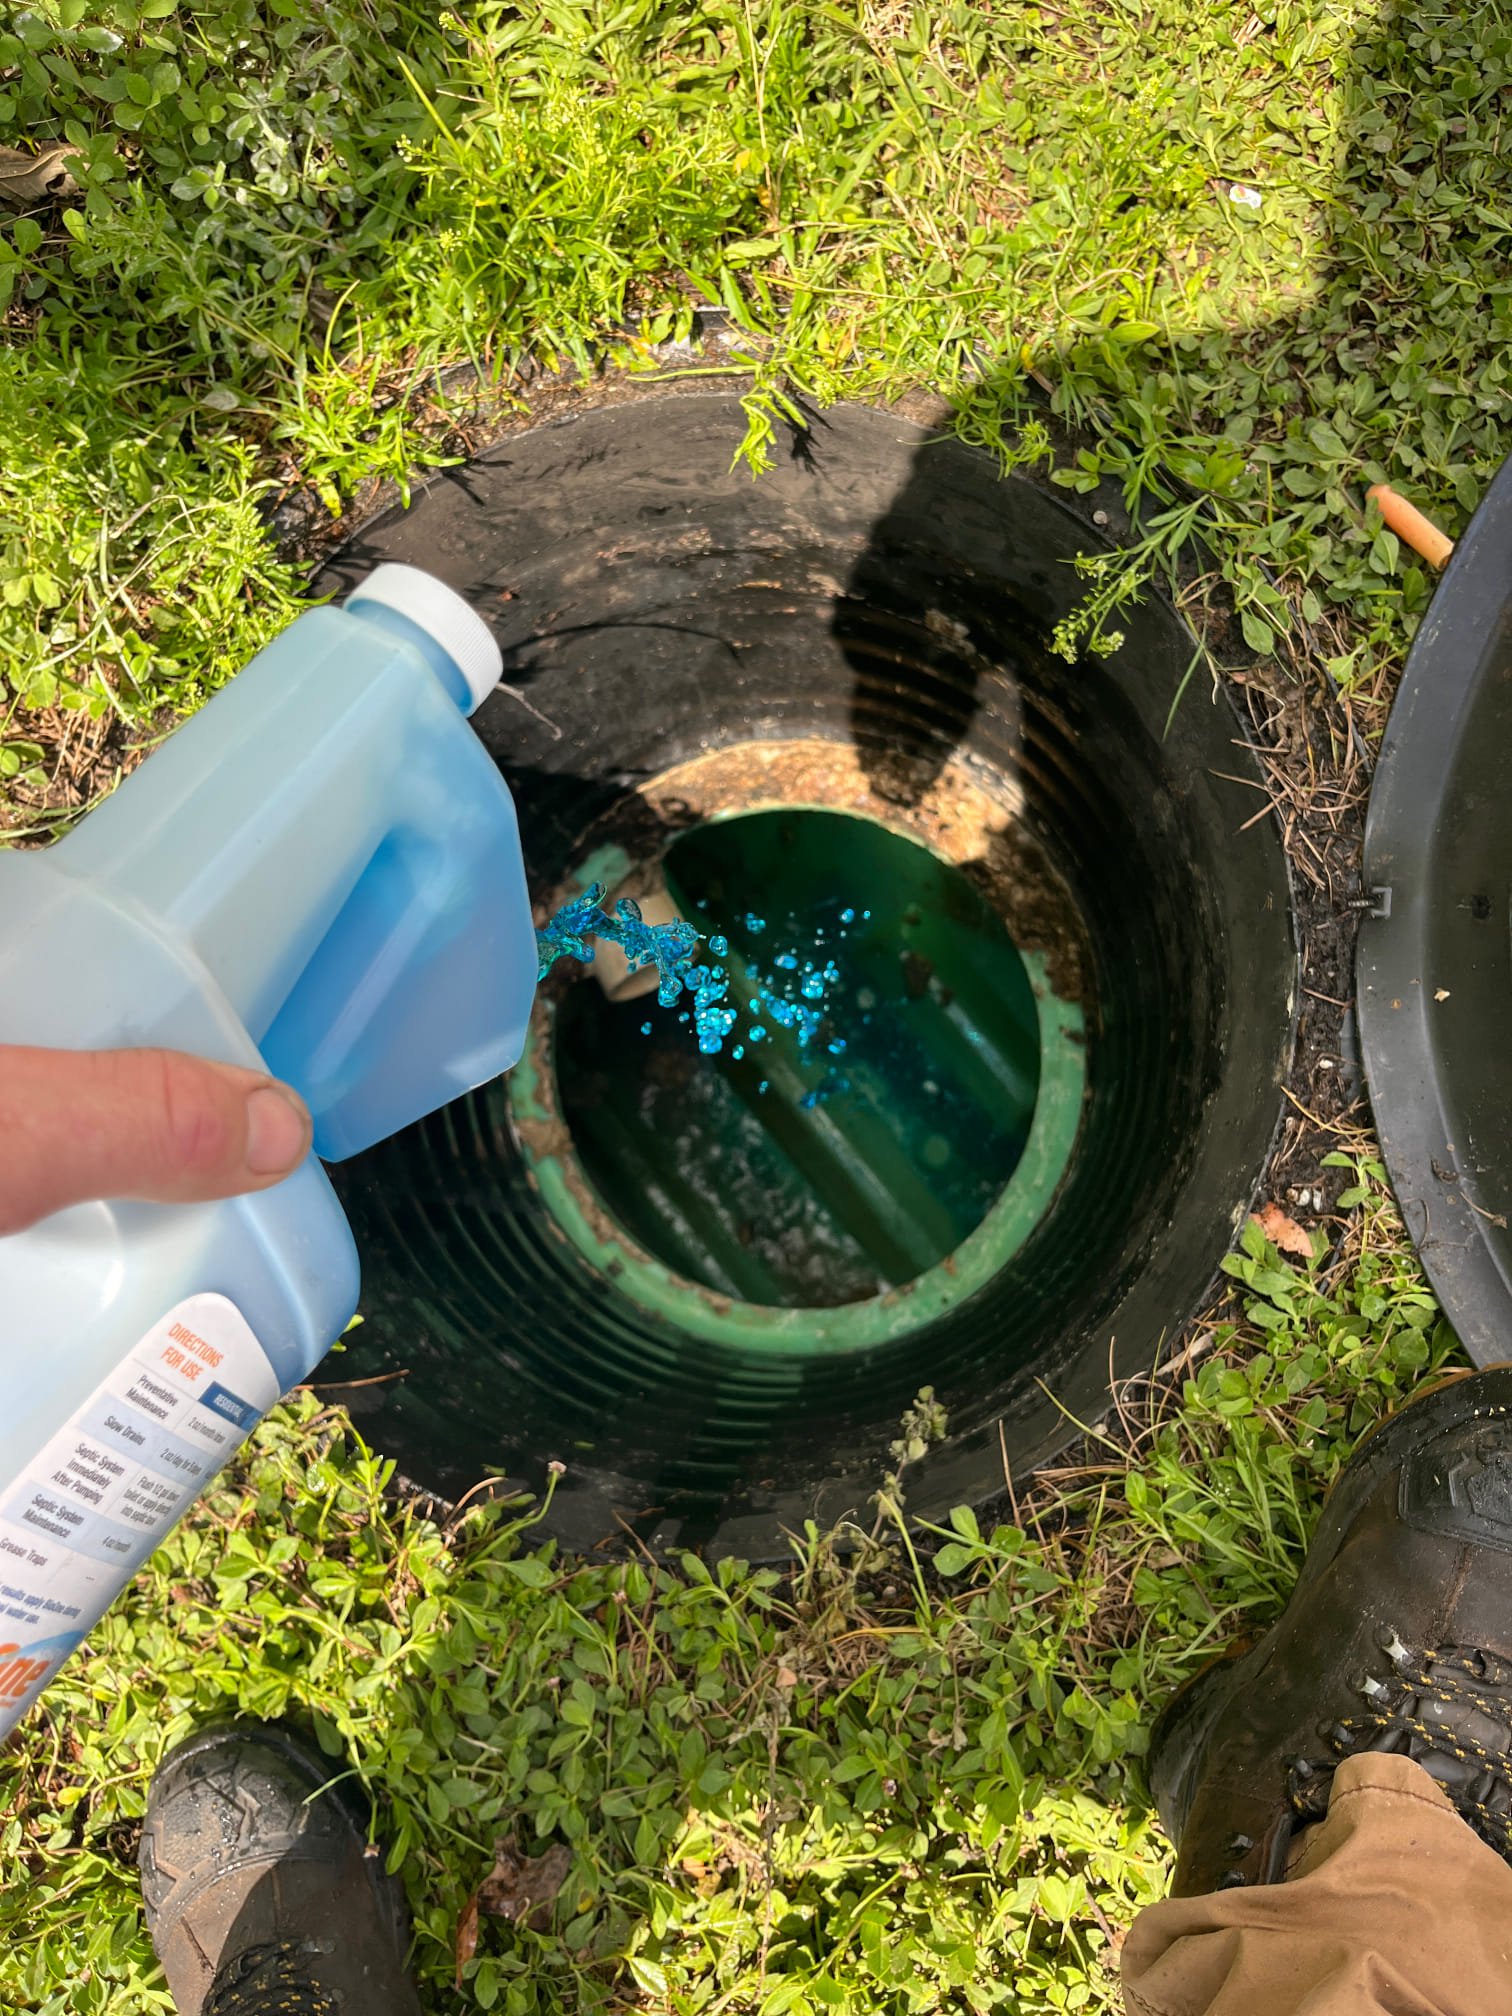 A newly-pumped septic tank with a cleaning solution being added .